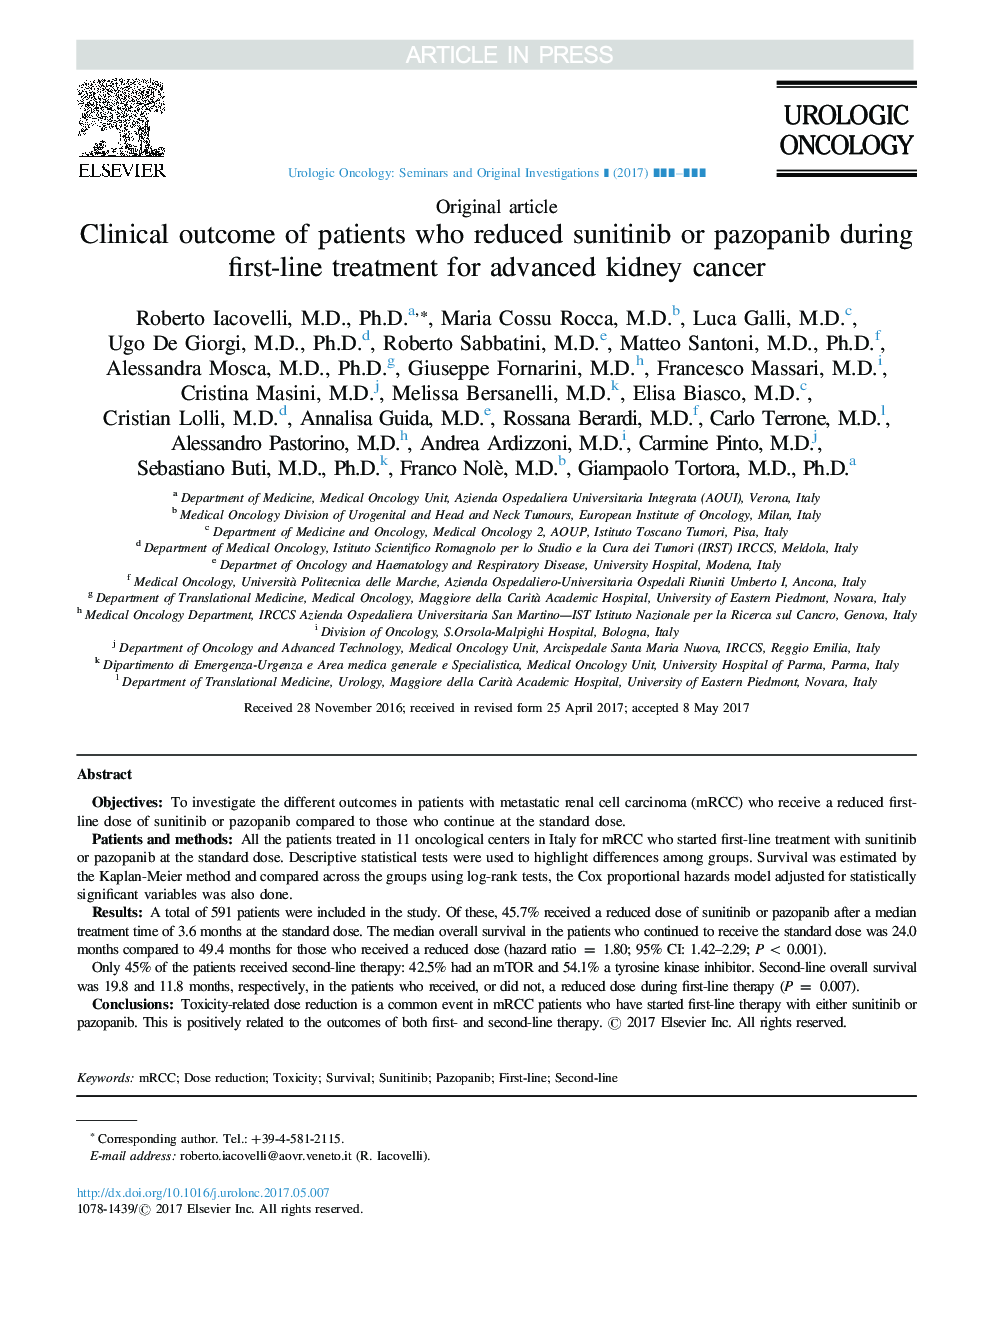 Clinical outcome of patients who reduced sunitinib or pazopanib during first-line treatment for advanced kidney cancer